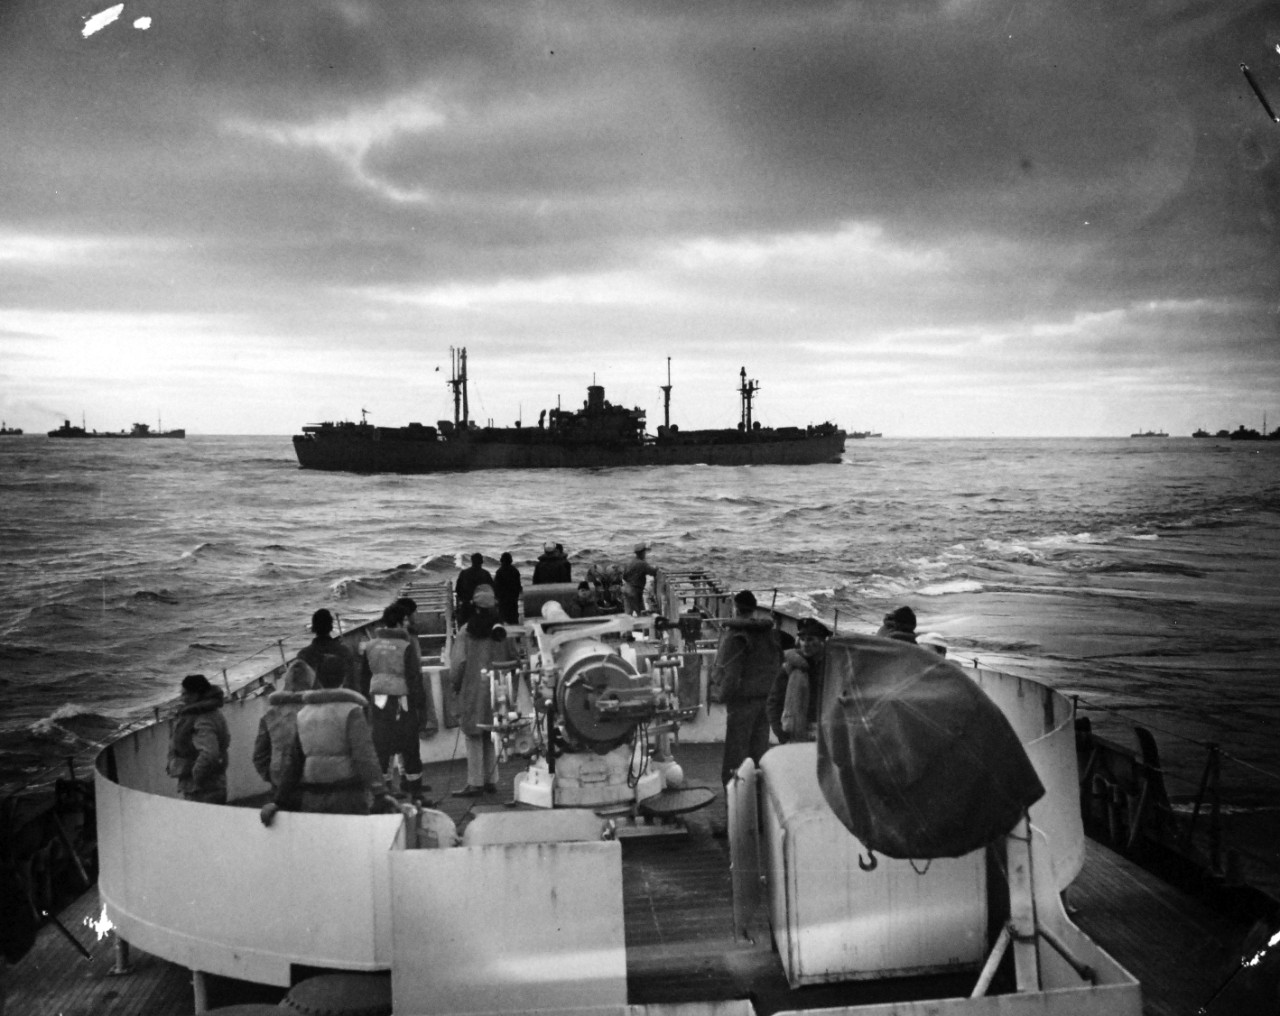 26-G-1523:  Sinking of German submarine U-175, April 1943.   The submarine was sunk off south-west of Ireland by USCGC Spencer (WPG-36) on April 17, 1943.     Official Caption: ""COAST GUARD CUTTER SINKS SUB: Target of the Nazi U-Boat -- These ships in the convoy being shielded by the U.S. Coast Guard Cutter USCGC SPENCER (WPG-36) steam past the warship just before the latter detects the underseas [sic] raider and swings into action.  The U-Boat, endeavoring to break into the center of the convoy, was sunk." Date: 17 April 1943 (Note on the back of the photo notes: "Not to be released for publication or announced to the public before 10:00 A.M. Eastern War-Time, June 2nd.") Official U.S. Coast Guard Photograph, now in the collections of the National Archives.  (2017/09/05).